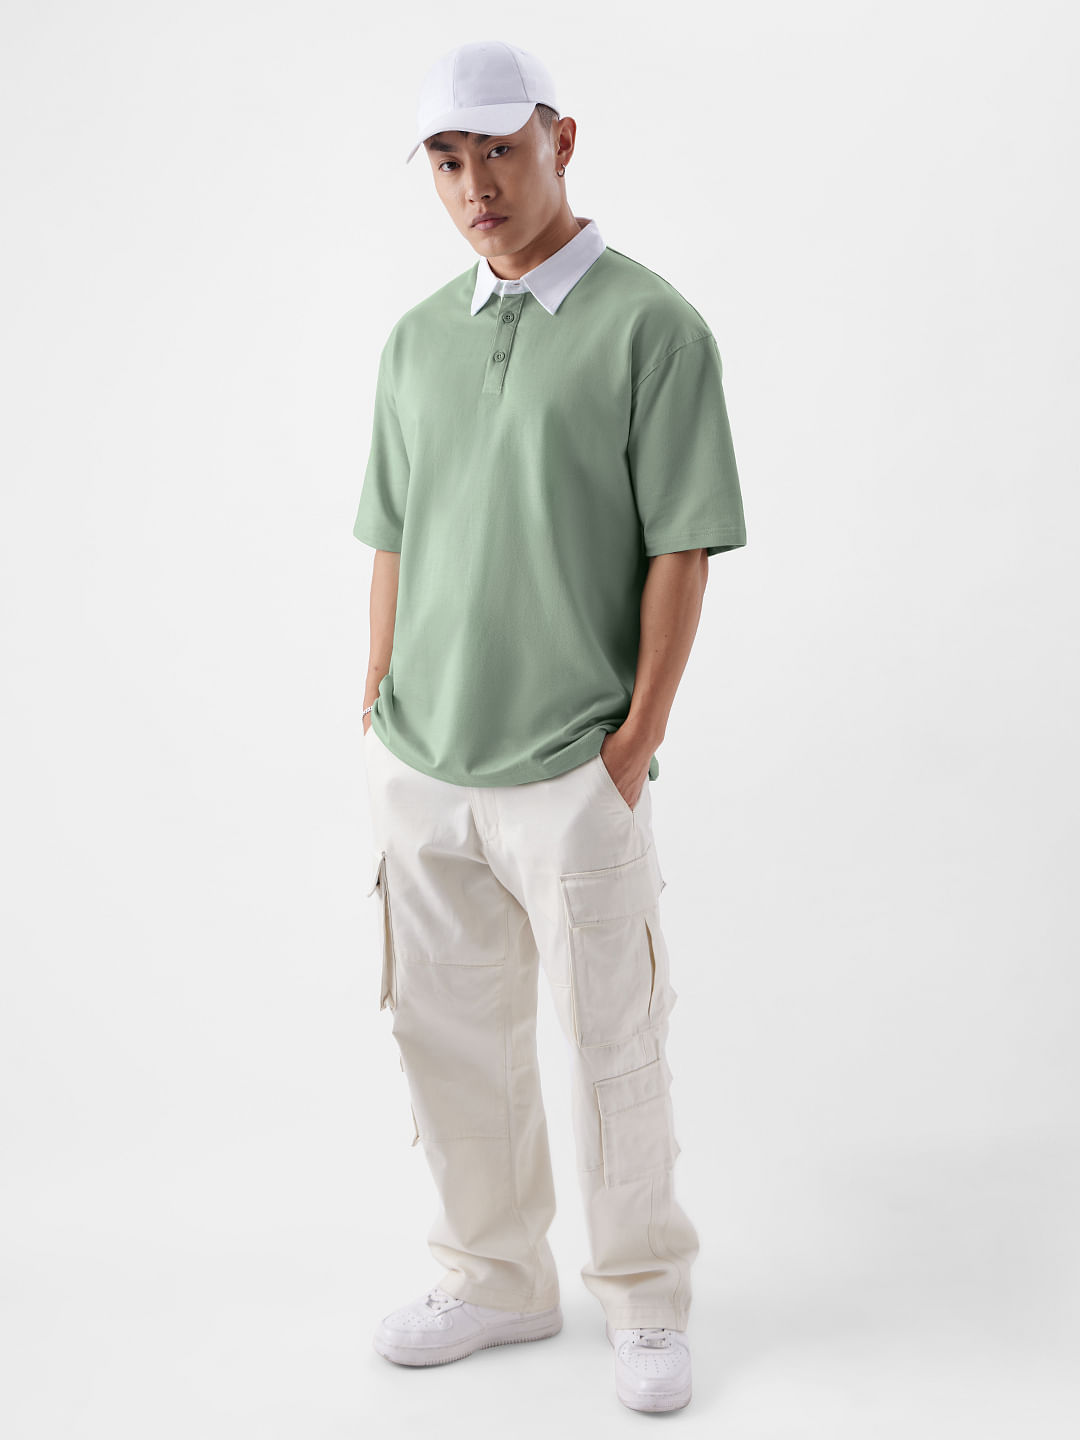 Buy Solid: Jade Men Overized Polos Online